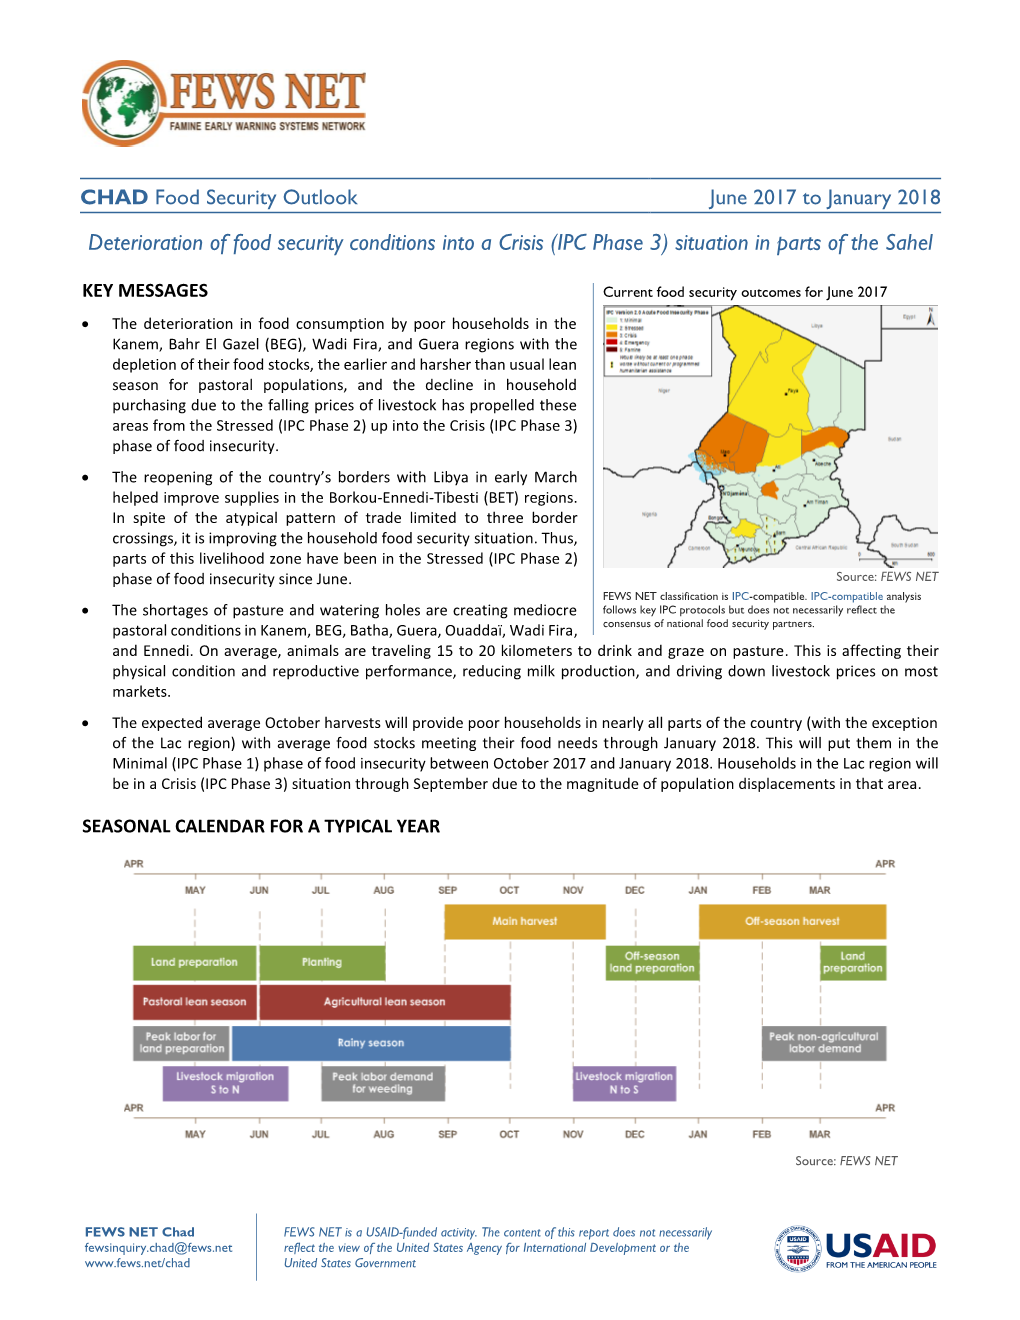 Deterioration of Food Security Conditions Into a Crisis (IPC Phase 3) Situation in Parts of the Sahel